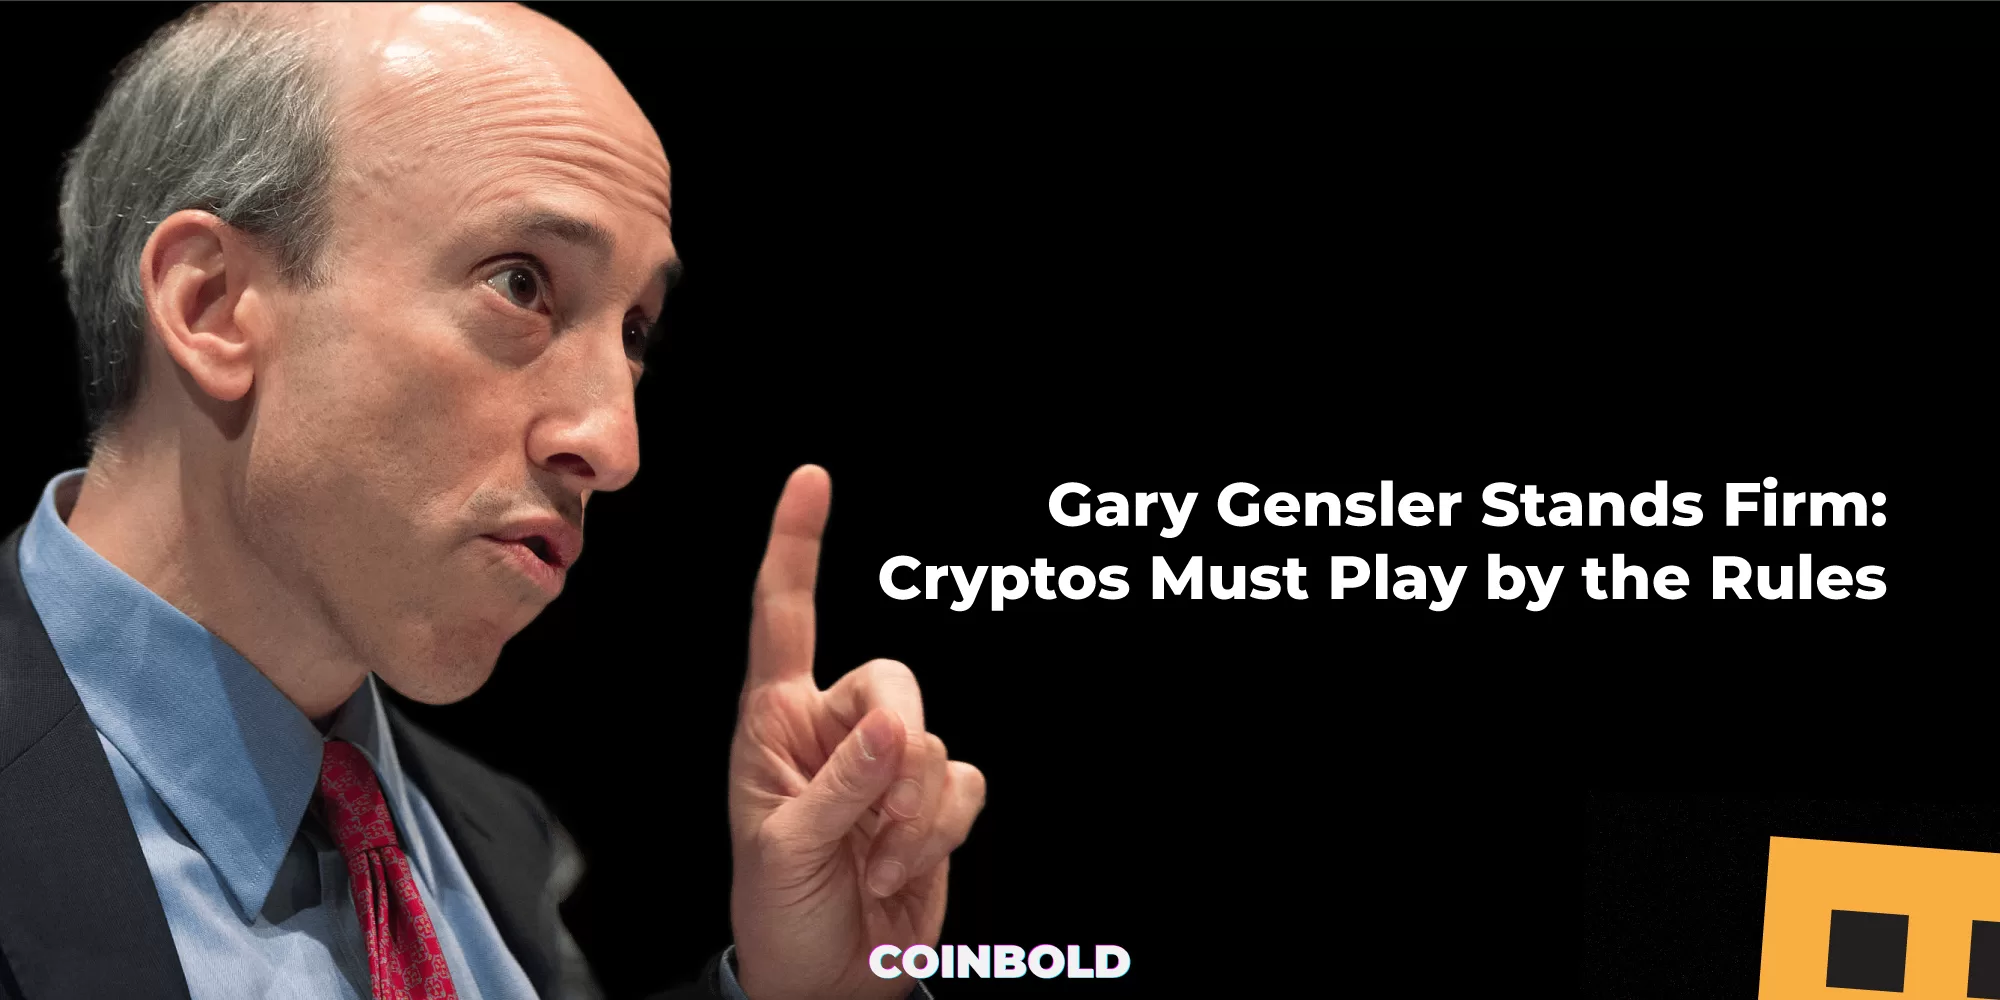 Gary Gensler Stands Firm Cryptos Must Play by the Rules